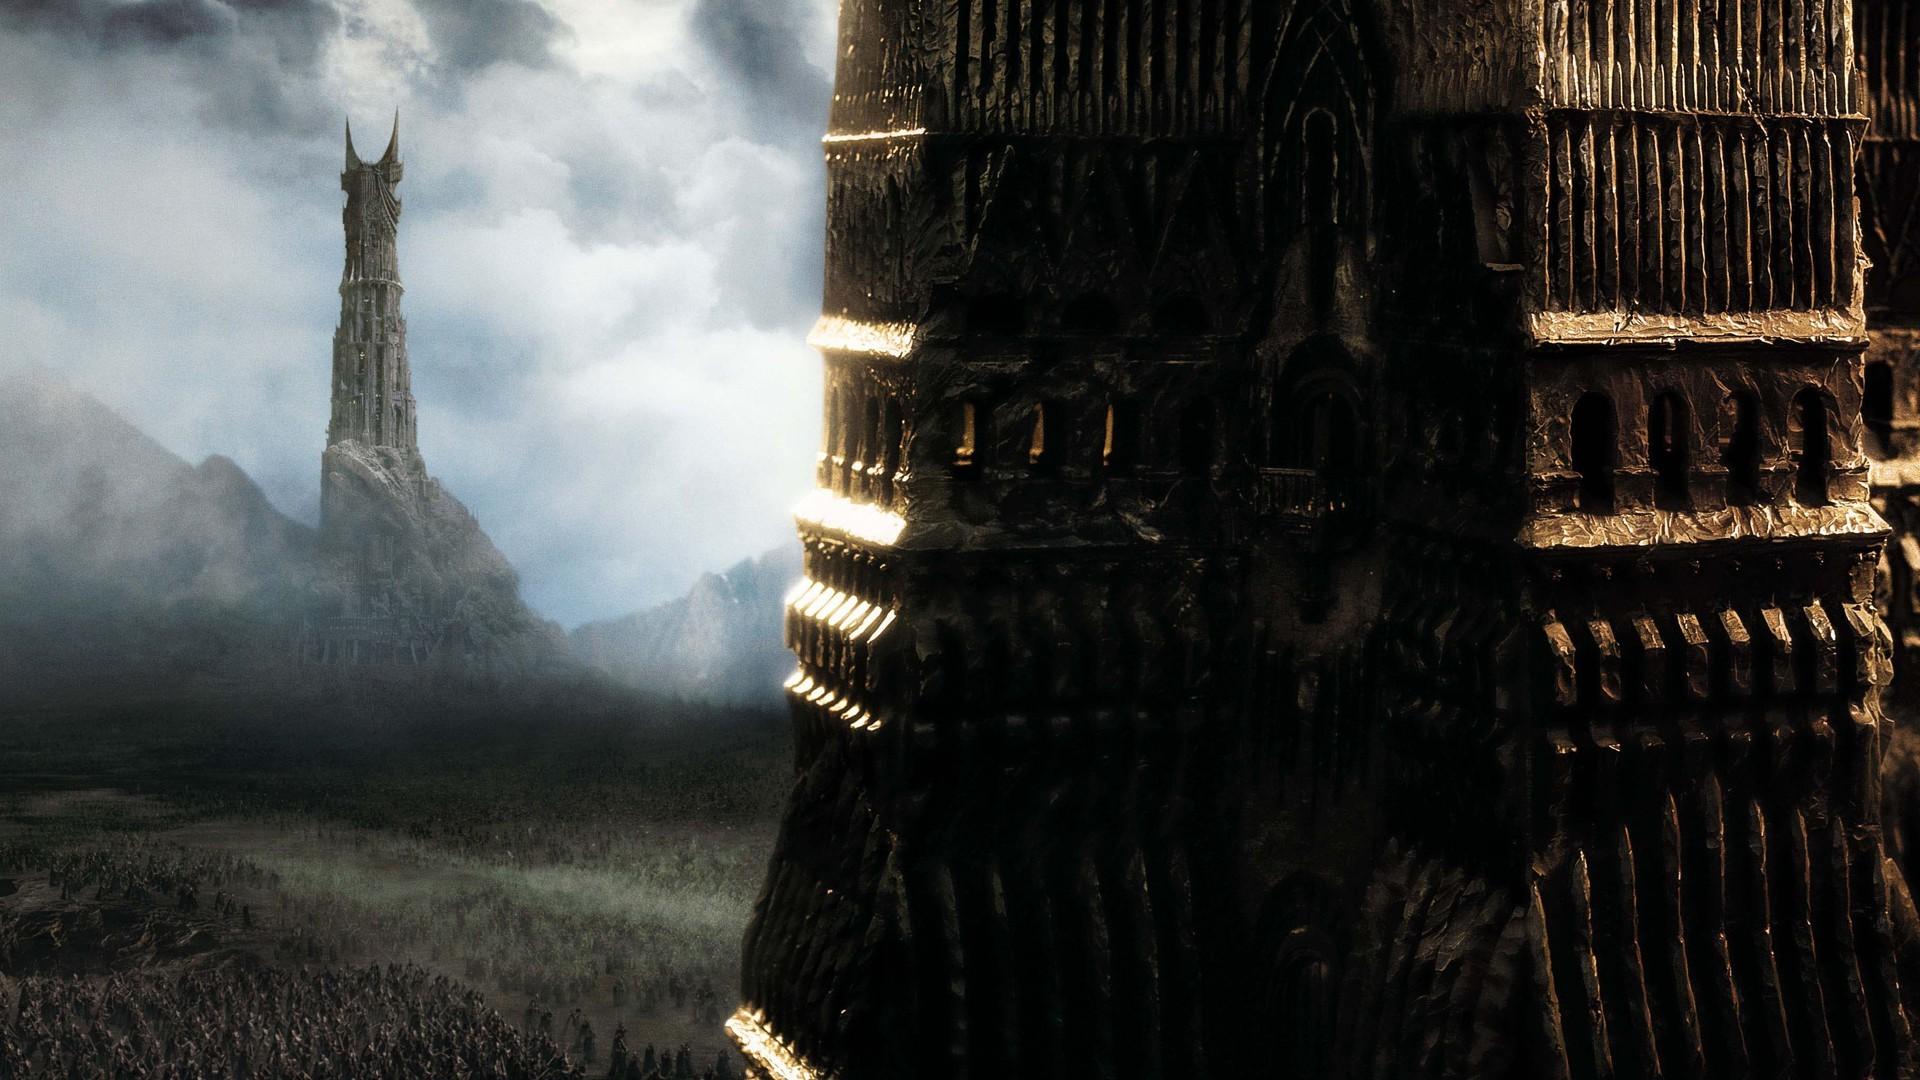 The Lord of the Rings: The Two Towers Wallpaper and Background